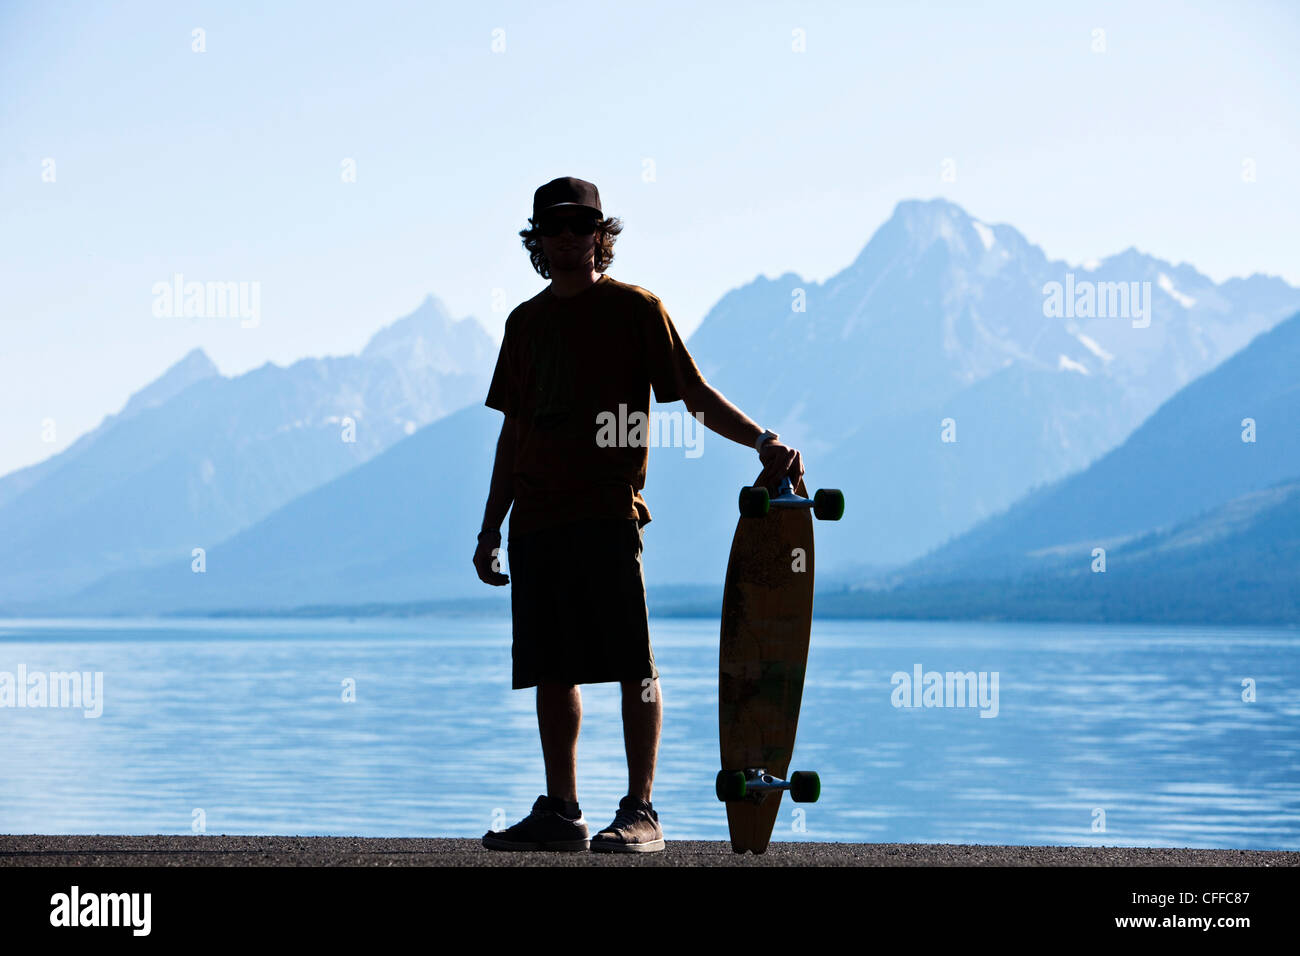 A young man standing next to his long board next to a lake in Wyoming. Stock Photo